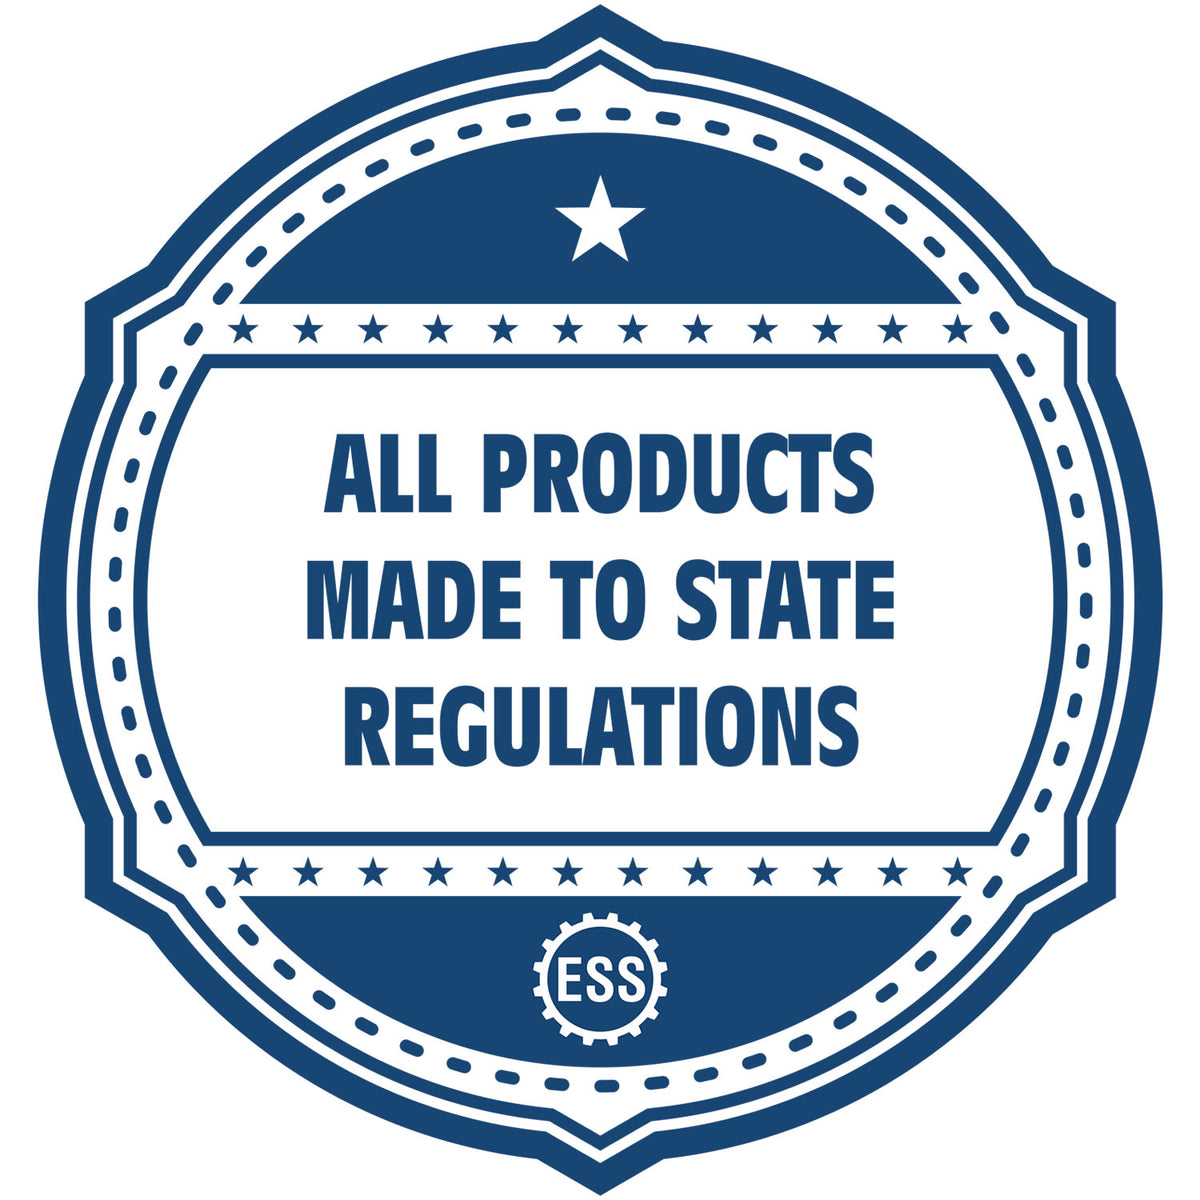 An icon or badge element for the Premium MaxLight Pre-Inked Rhode Island Engineering Stamp showing that this product is made in compliance with state regulations.